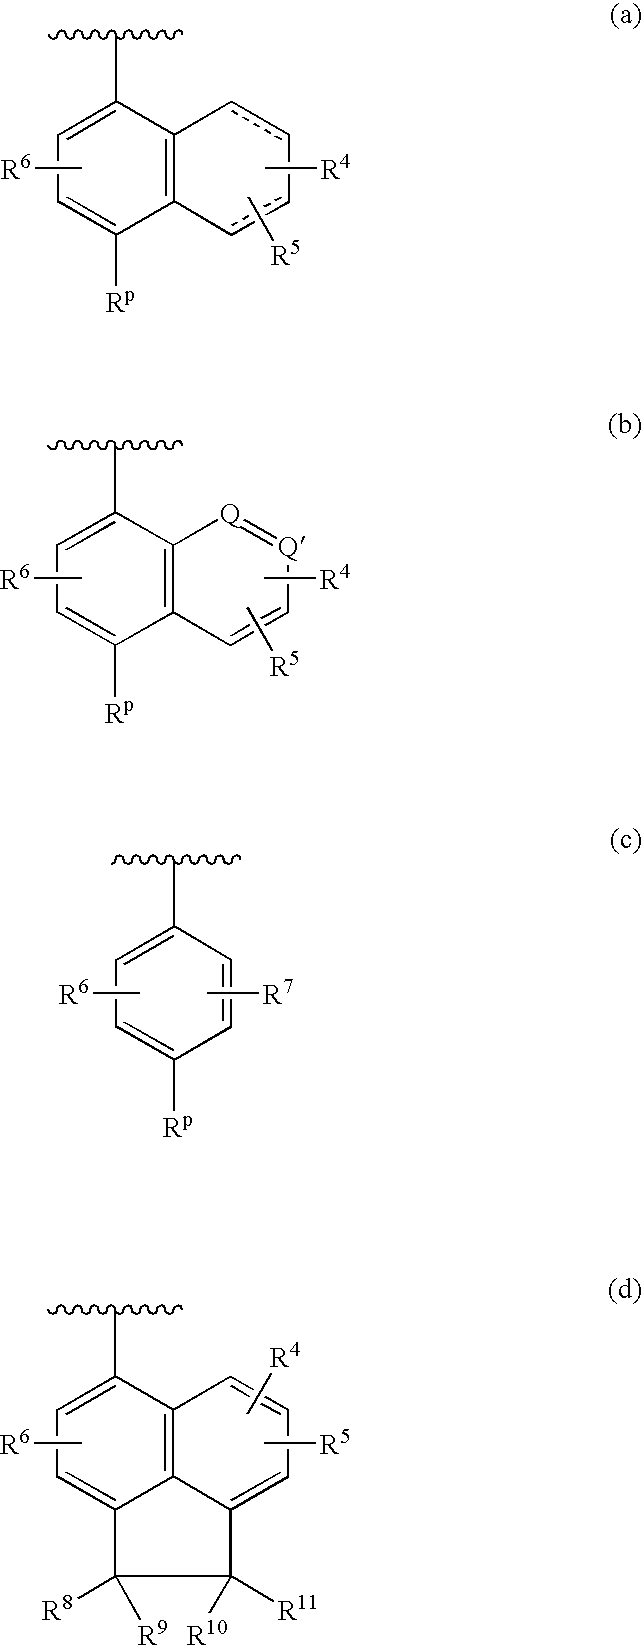 4-cyanophenylamino-substituted bicyclic heterocyclic compounds as HIV inhibitors